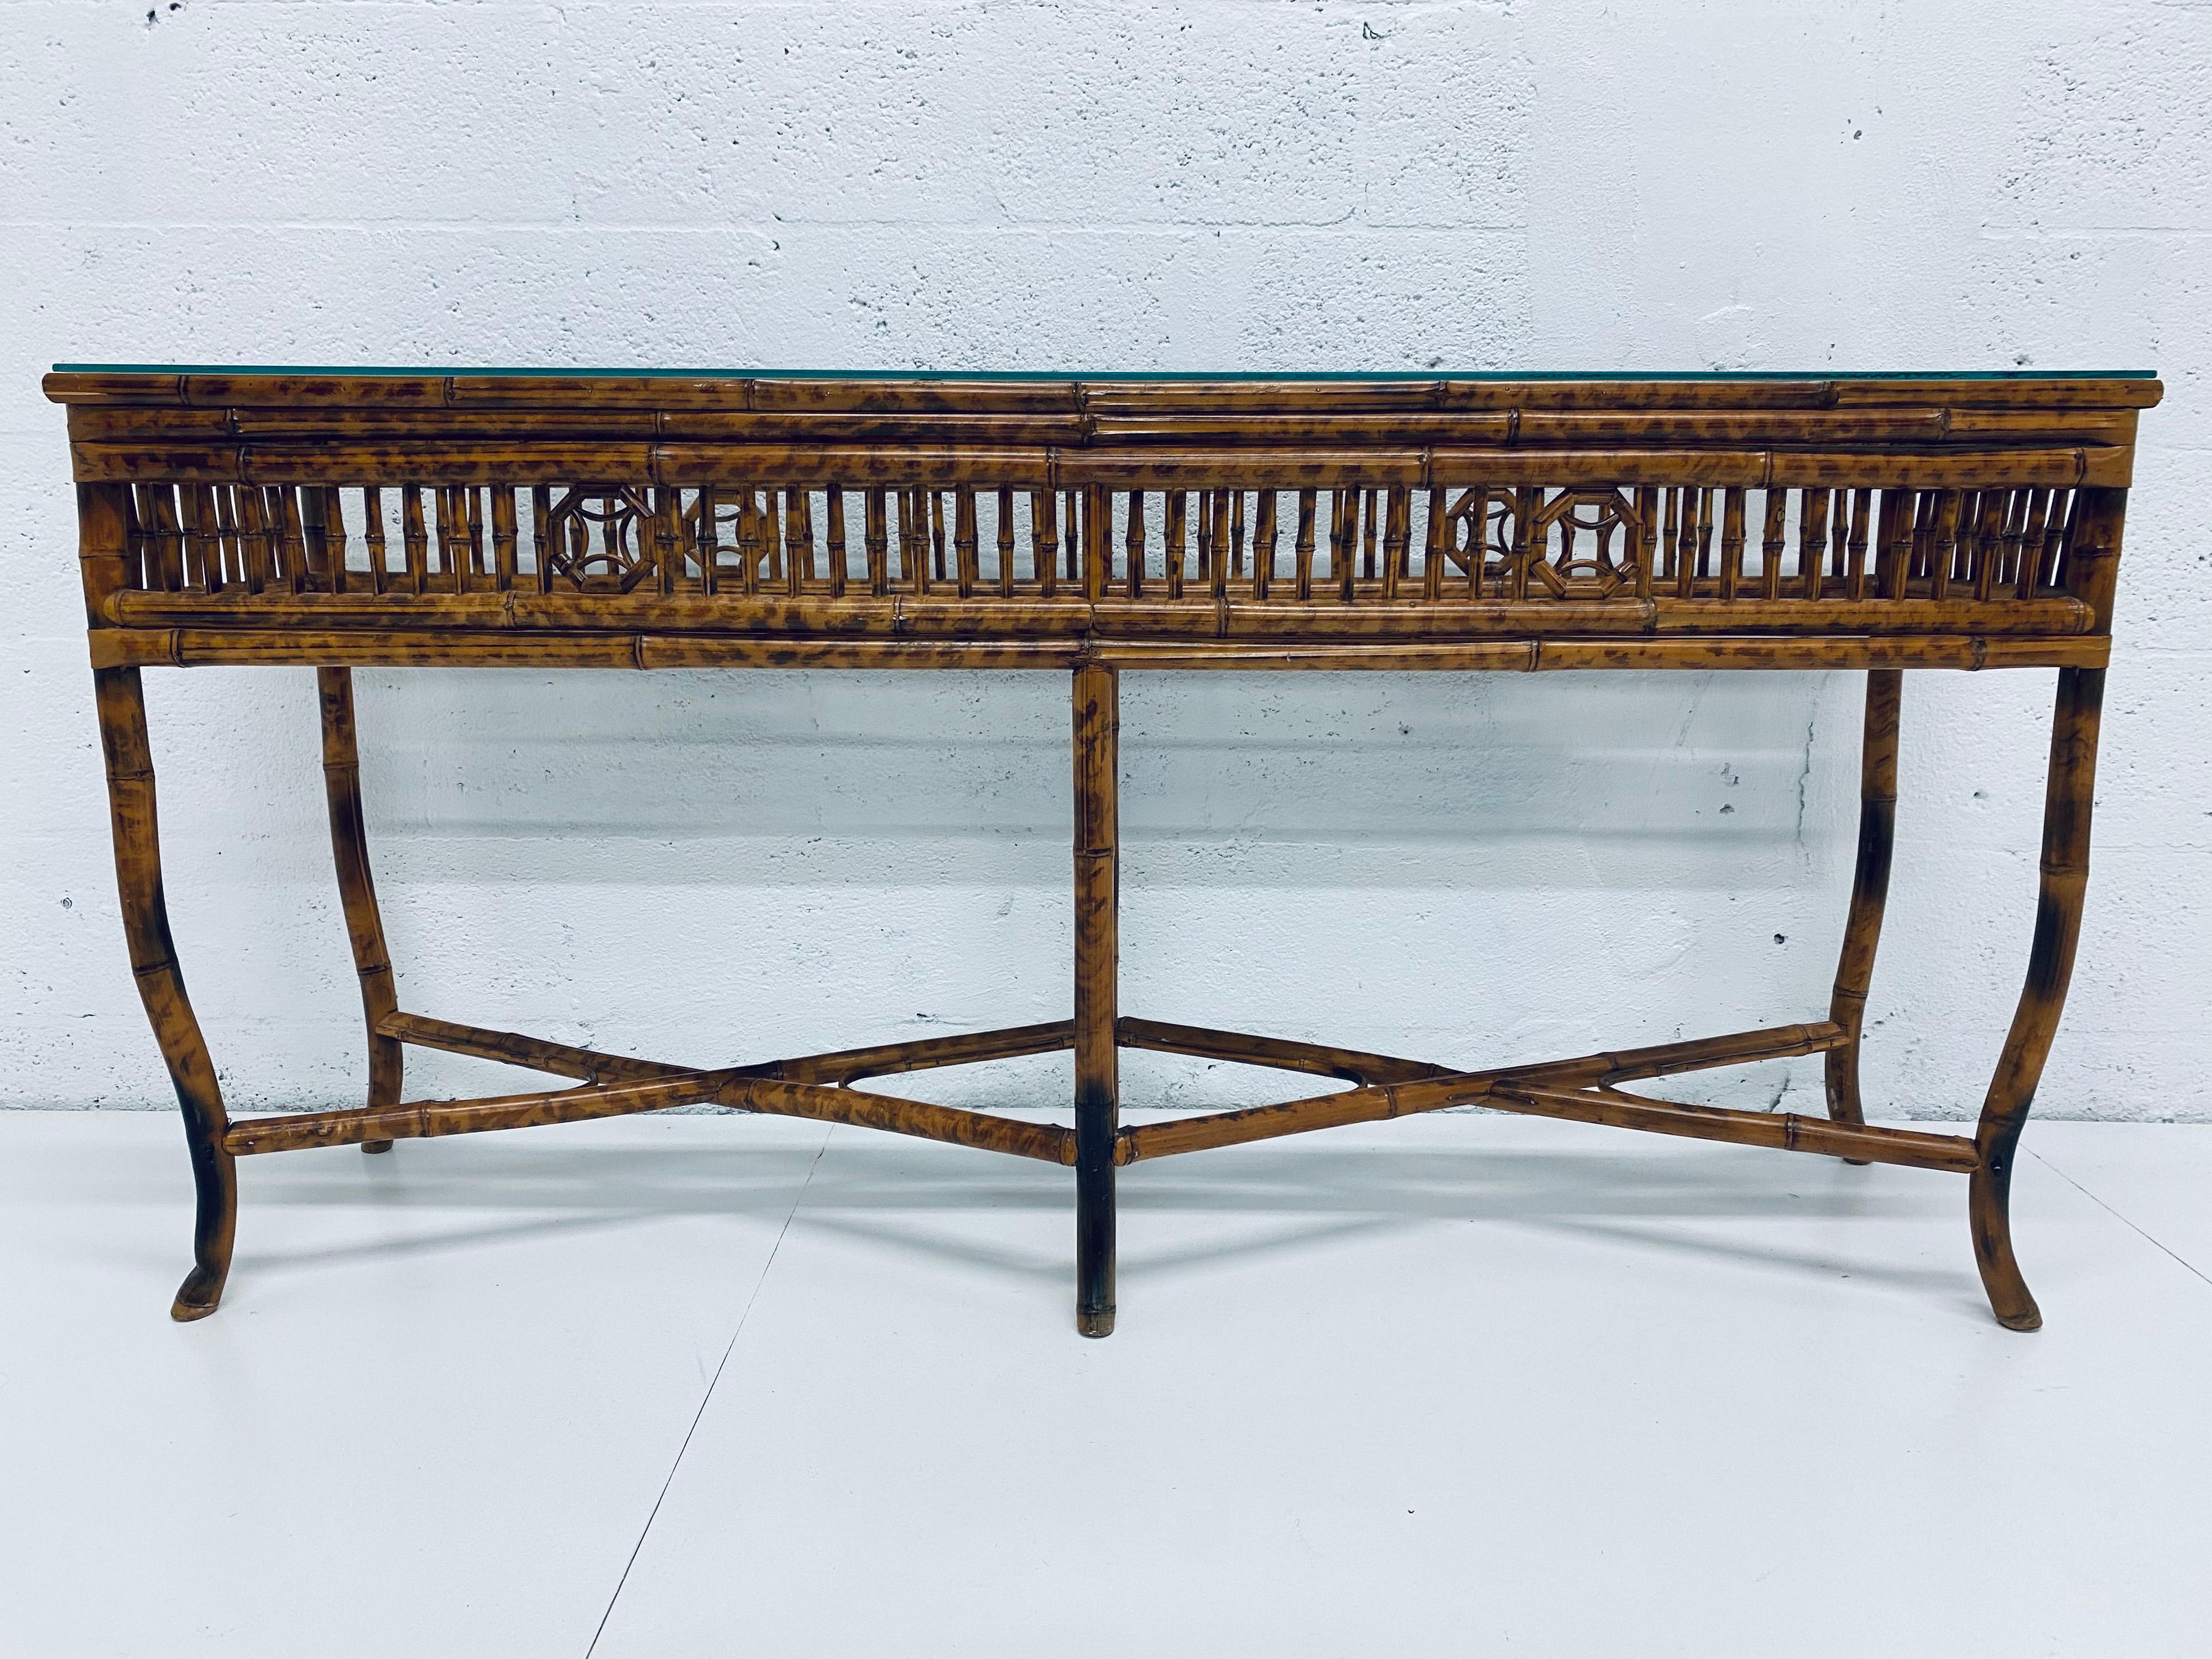 Midcentury Regency console table made of bamboo with a burnt tortoise finish from the 1970s.